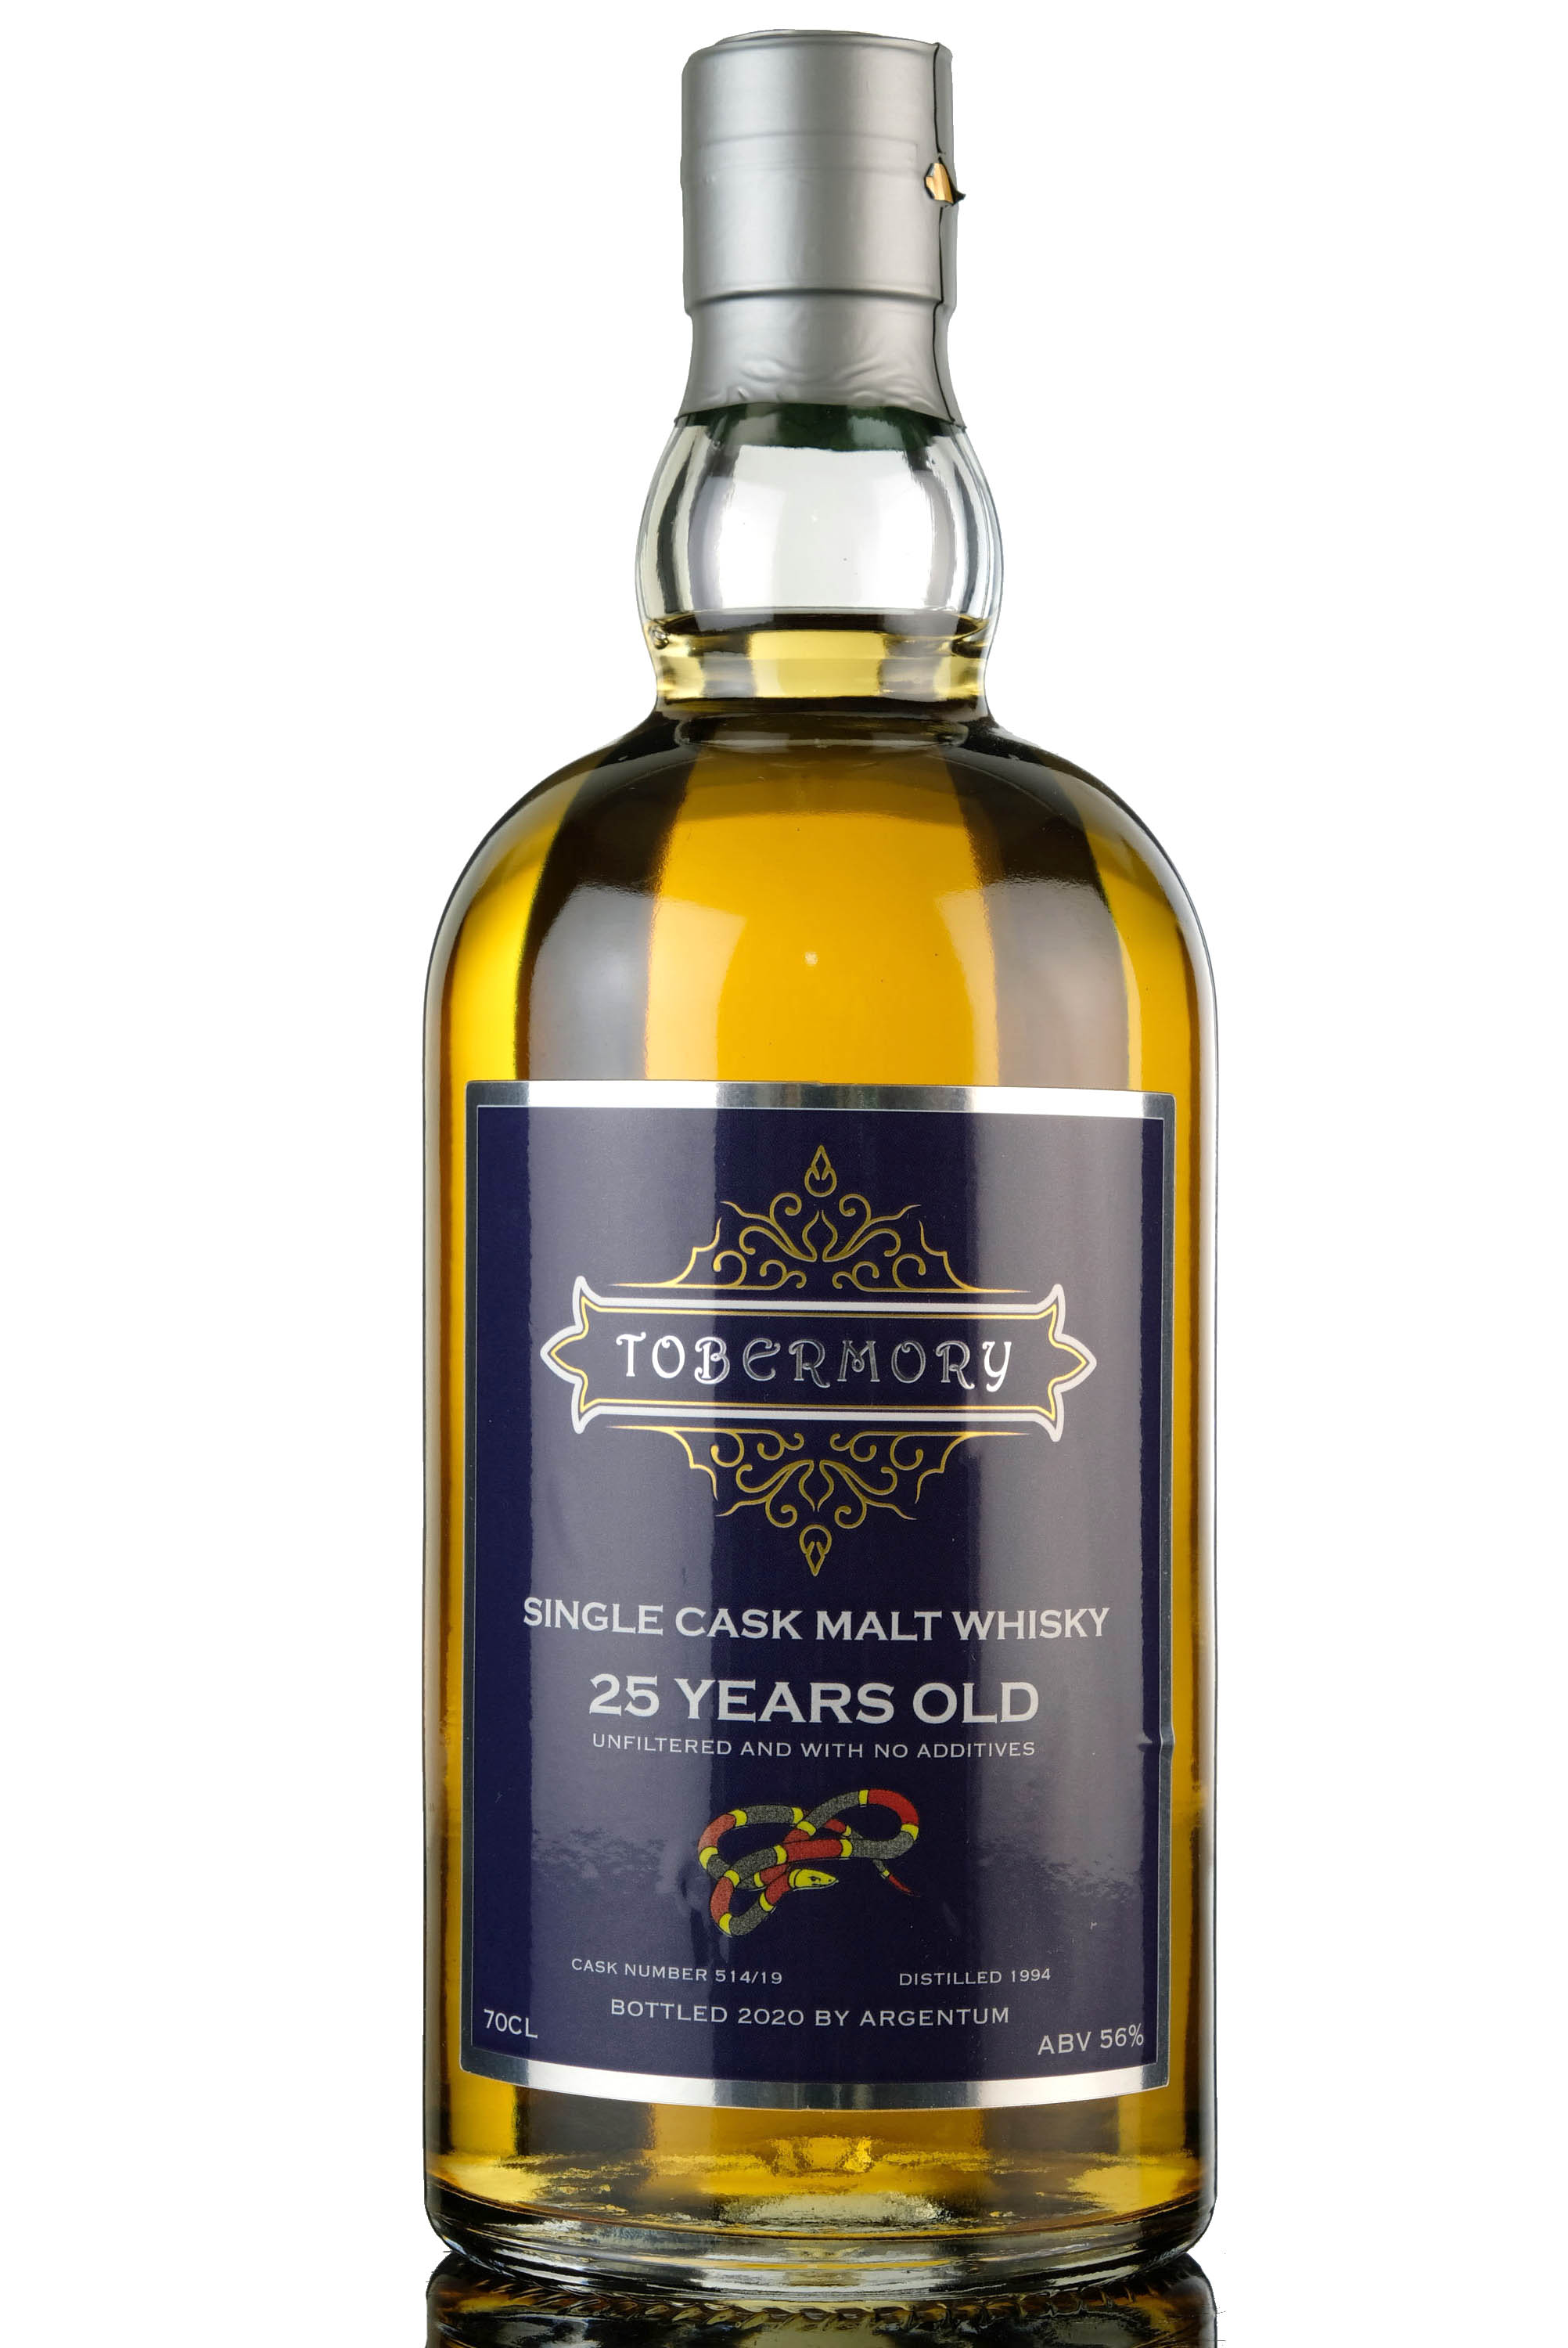 Tobermory 1994-2020 - 25 Year Old - Single Cask 514/19